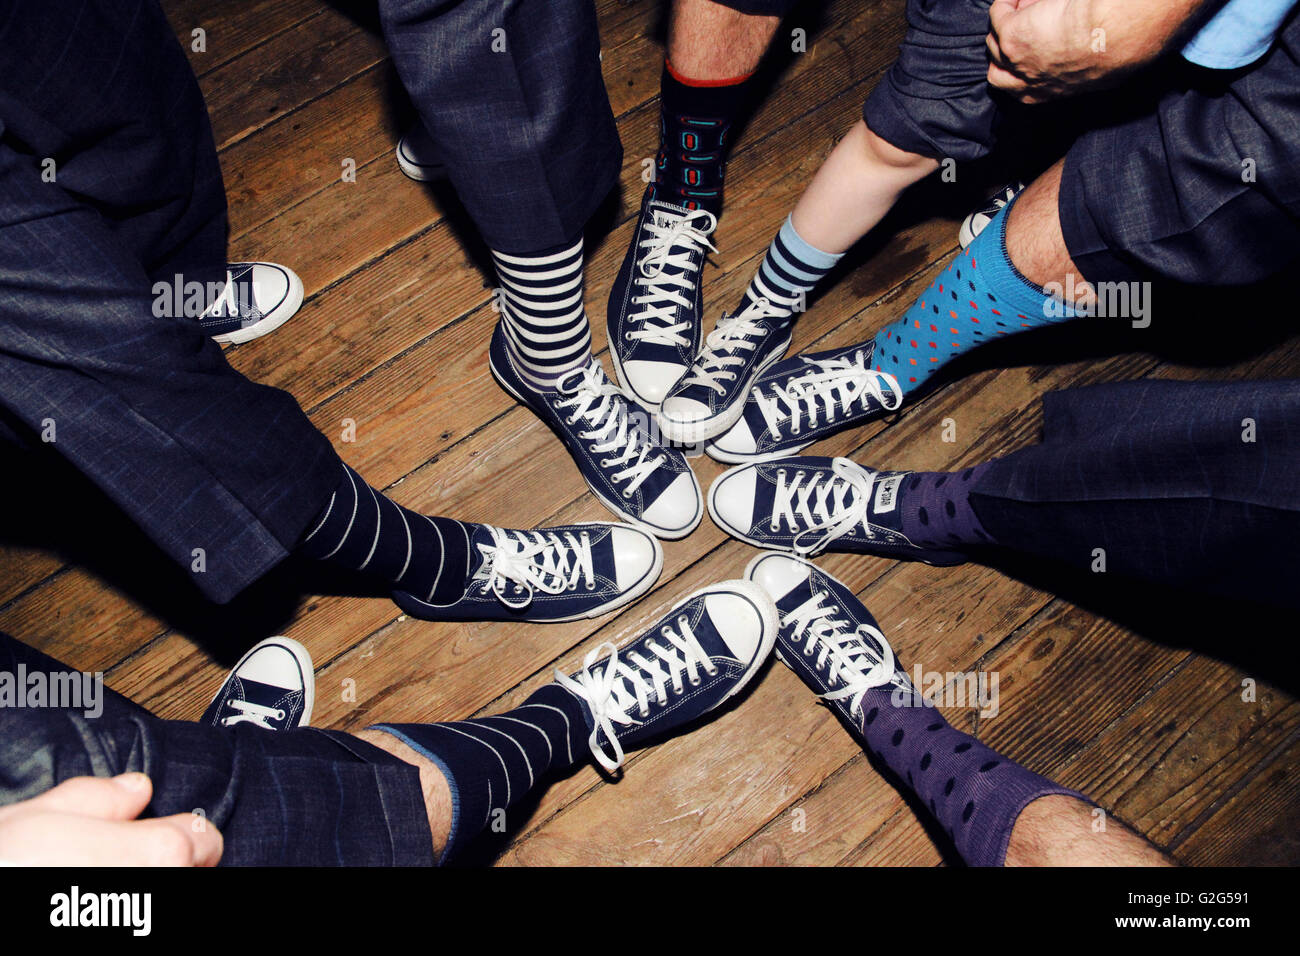 Group of Men Showing Converse Sneakers and Socks at Wedding, High ... شيشة بالانجليزي